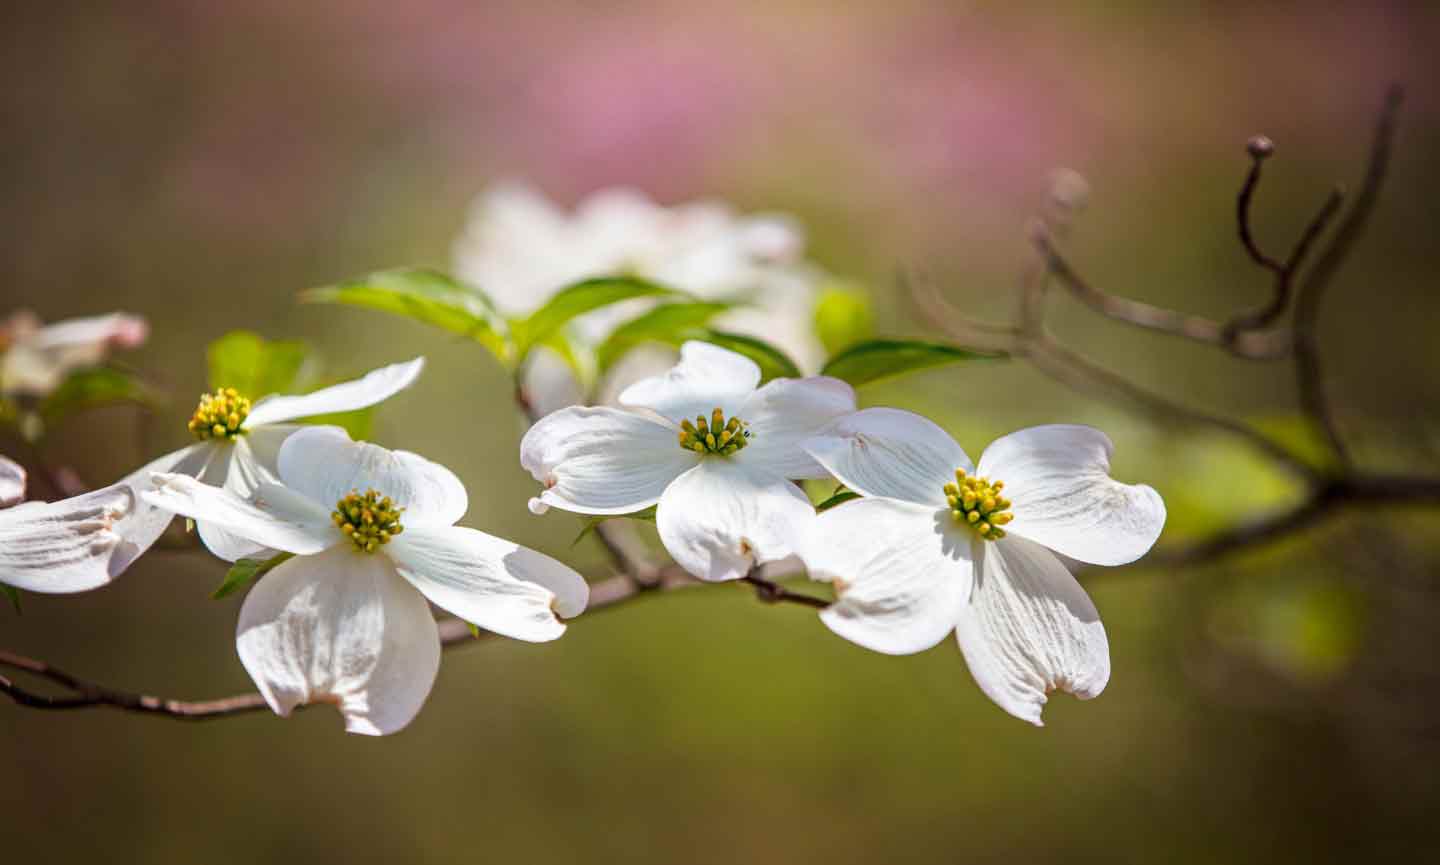 A dogwood branch with white flowers